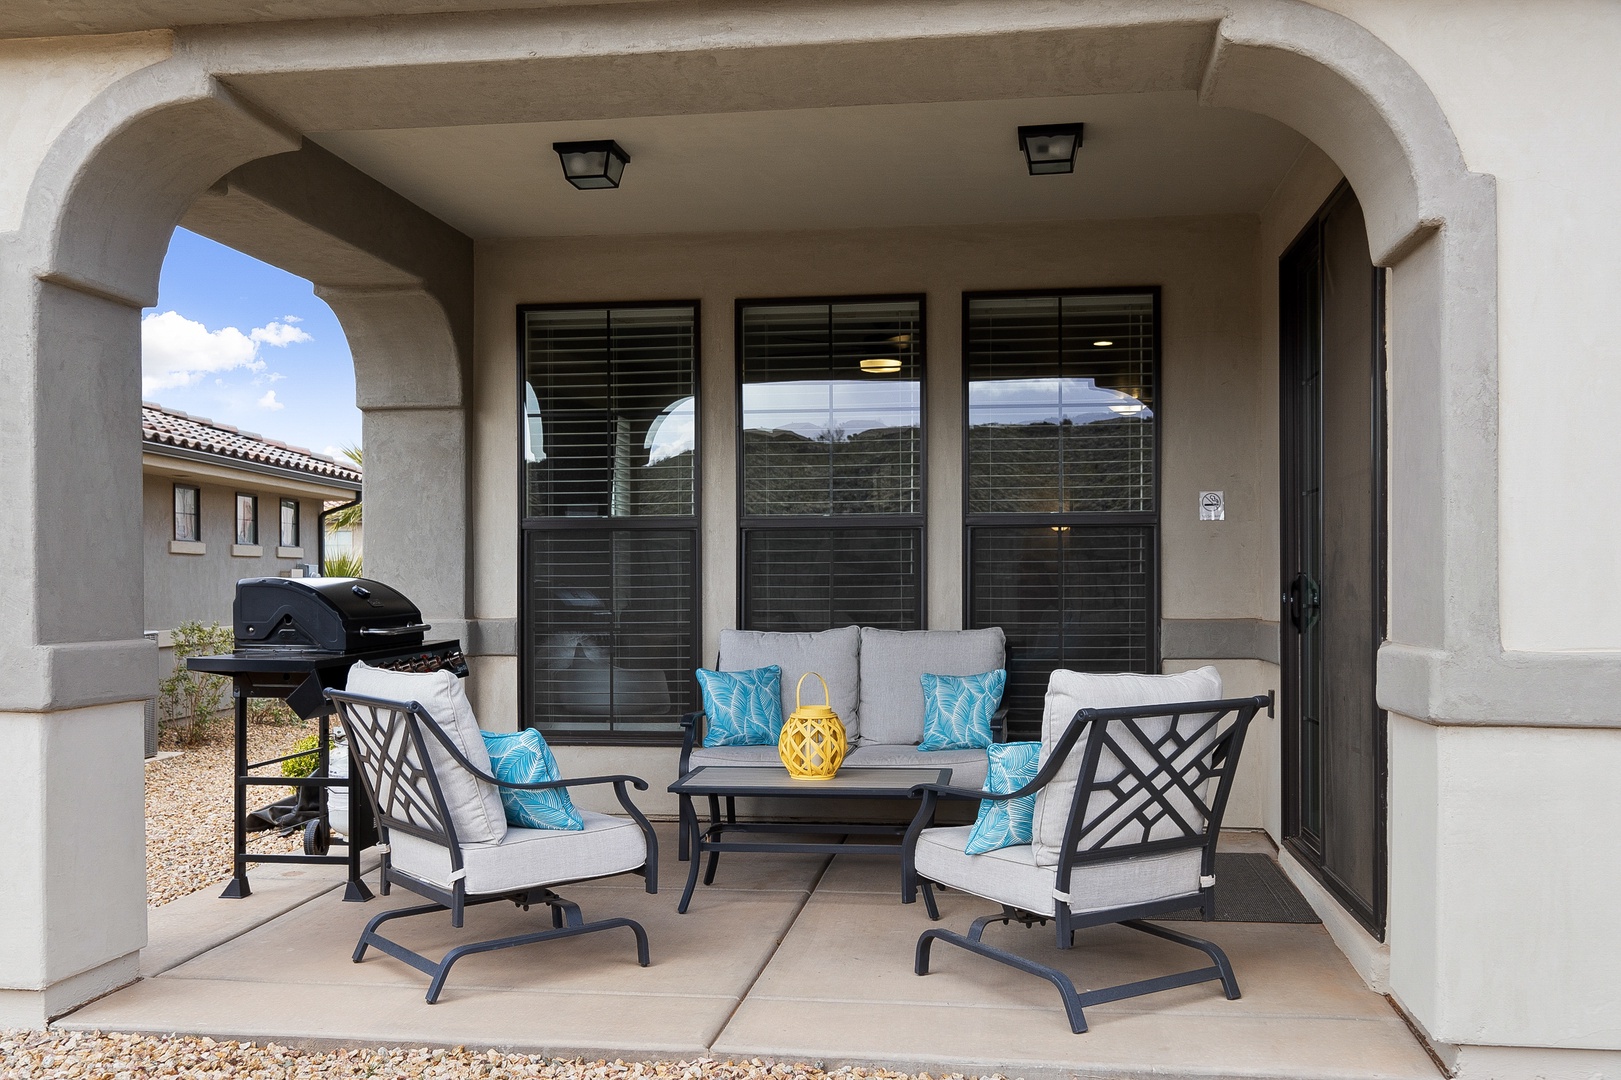 Ample outdoor seating for family and friends